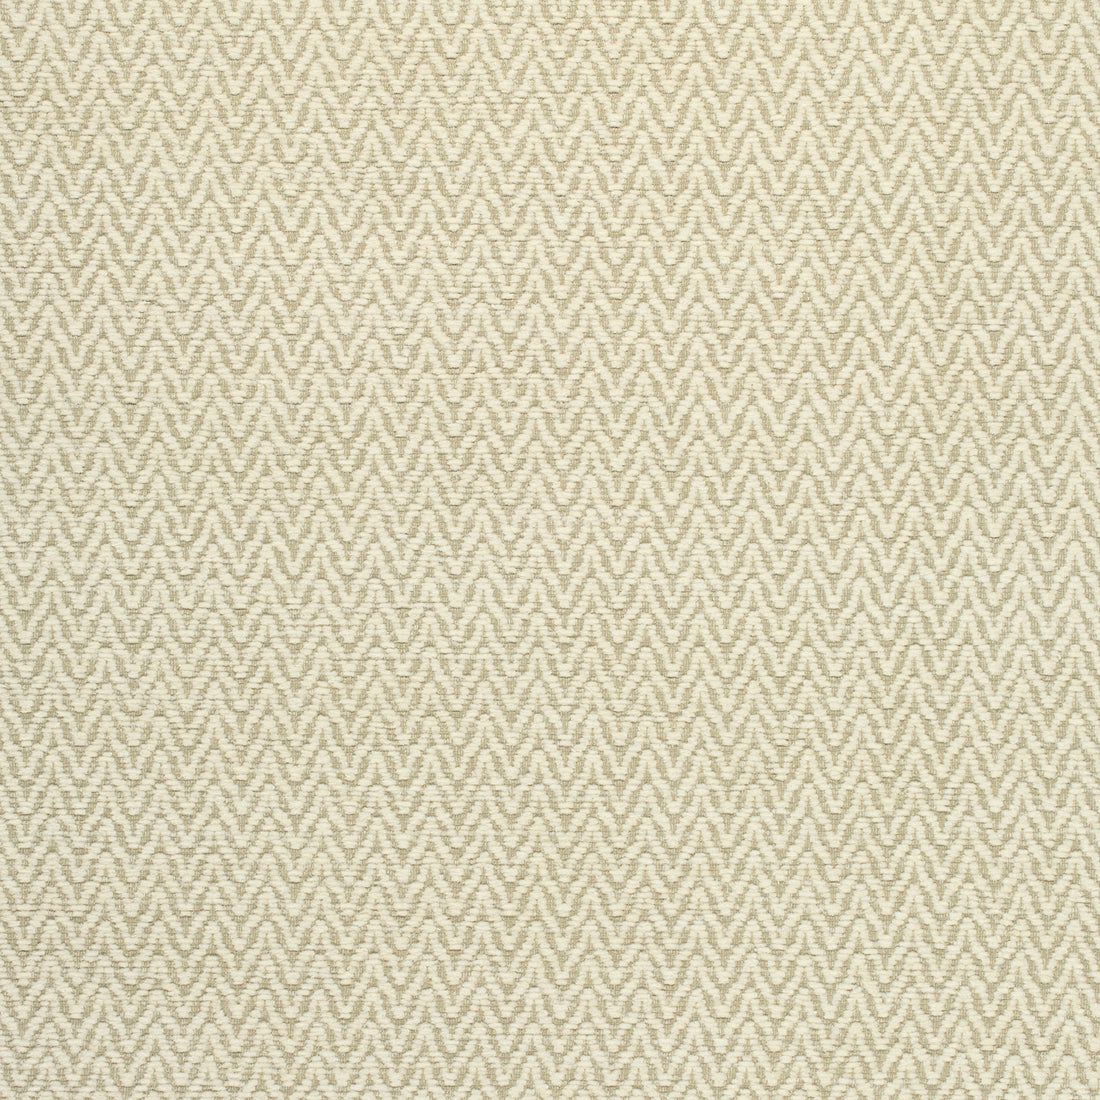 Beatrix fabric in oatmeal color - pattern number W80601 - by Thibaut in the Pinnacle collection